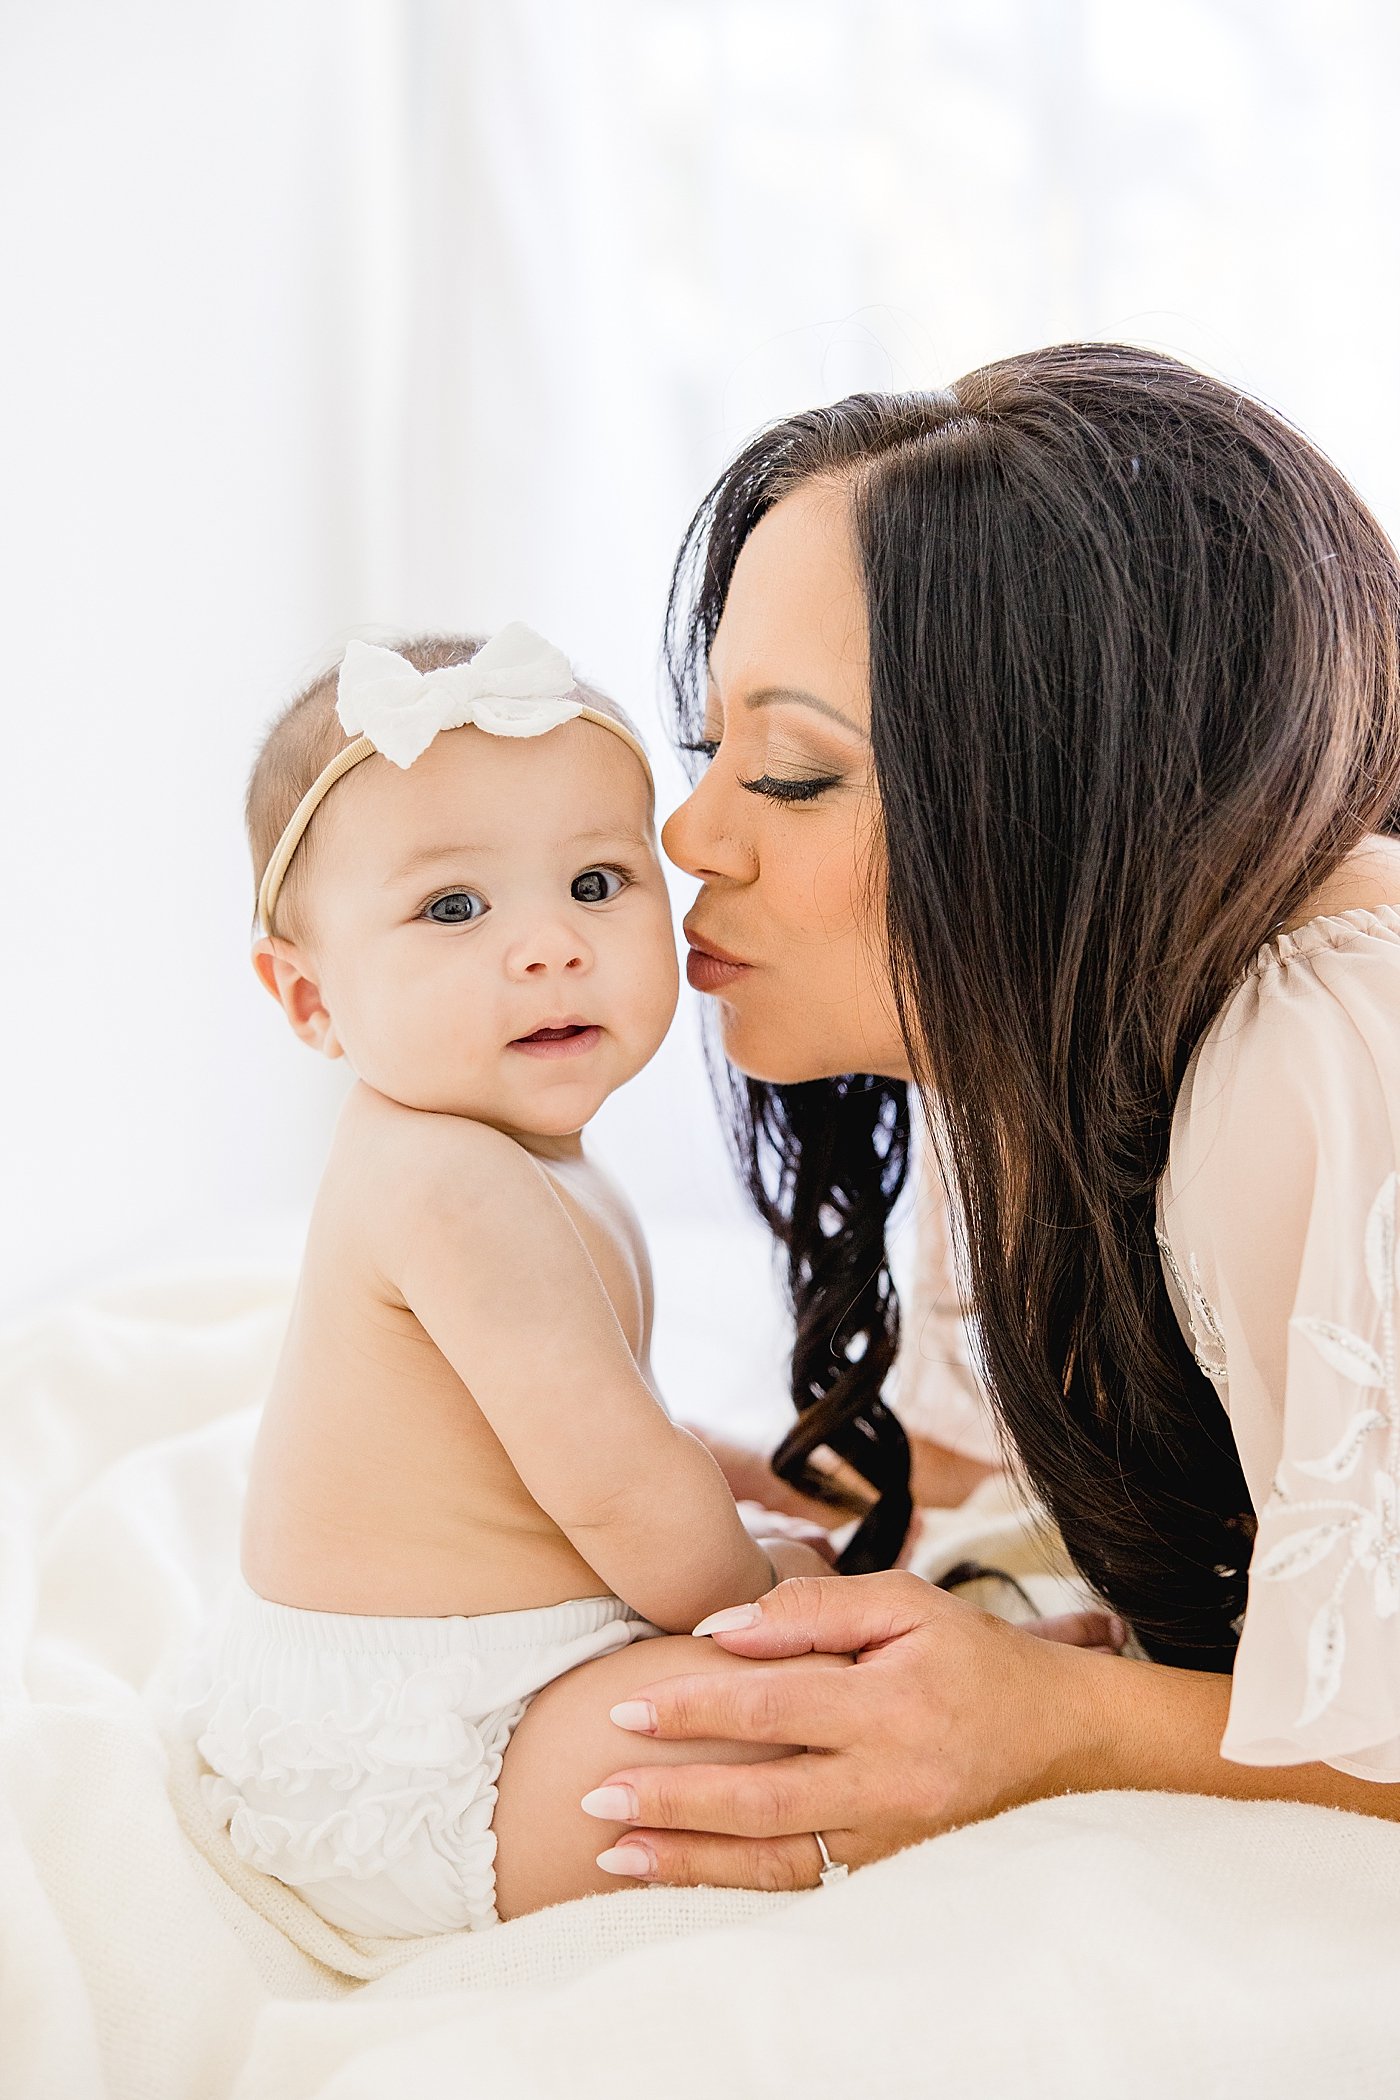 Baby Girl studio session in Newport Beach | Ambre Williams Photography